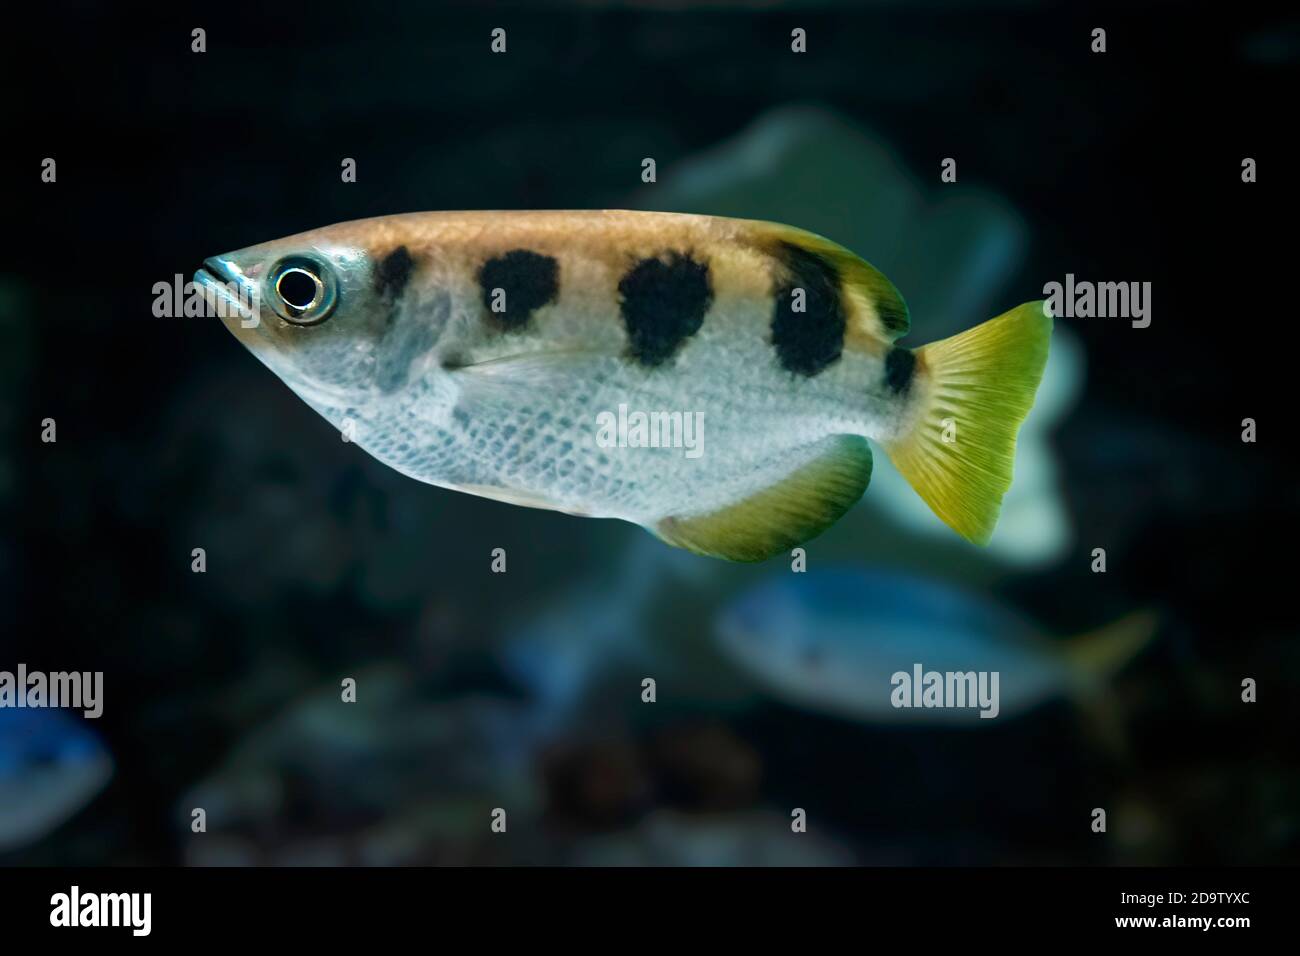 White fish with large black spots and yellow tail fins. Archerfish (Toxotes jaculatrix) isolated on dark background. Stock Photo